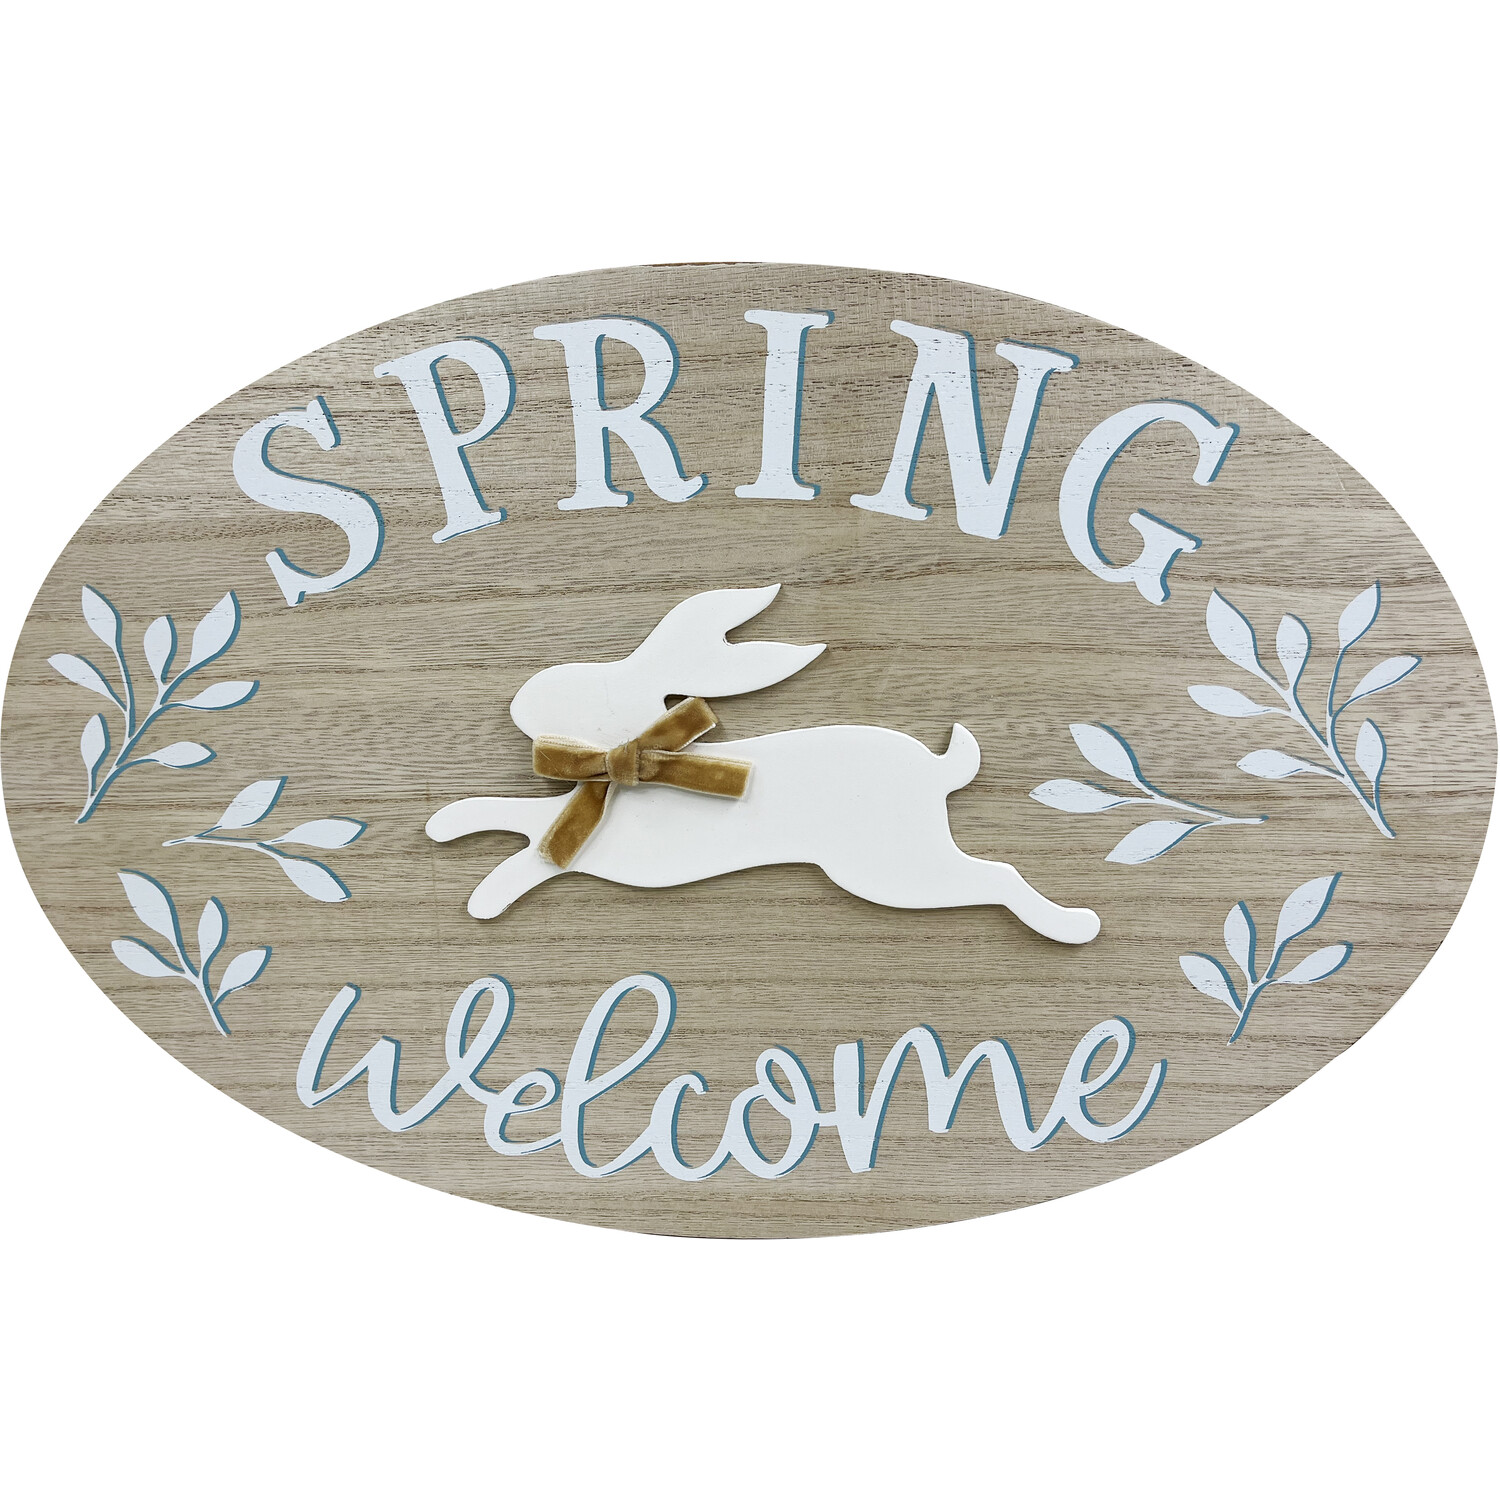 Welcome Spring Bunny Plaque - Brown Image 2